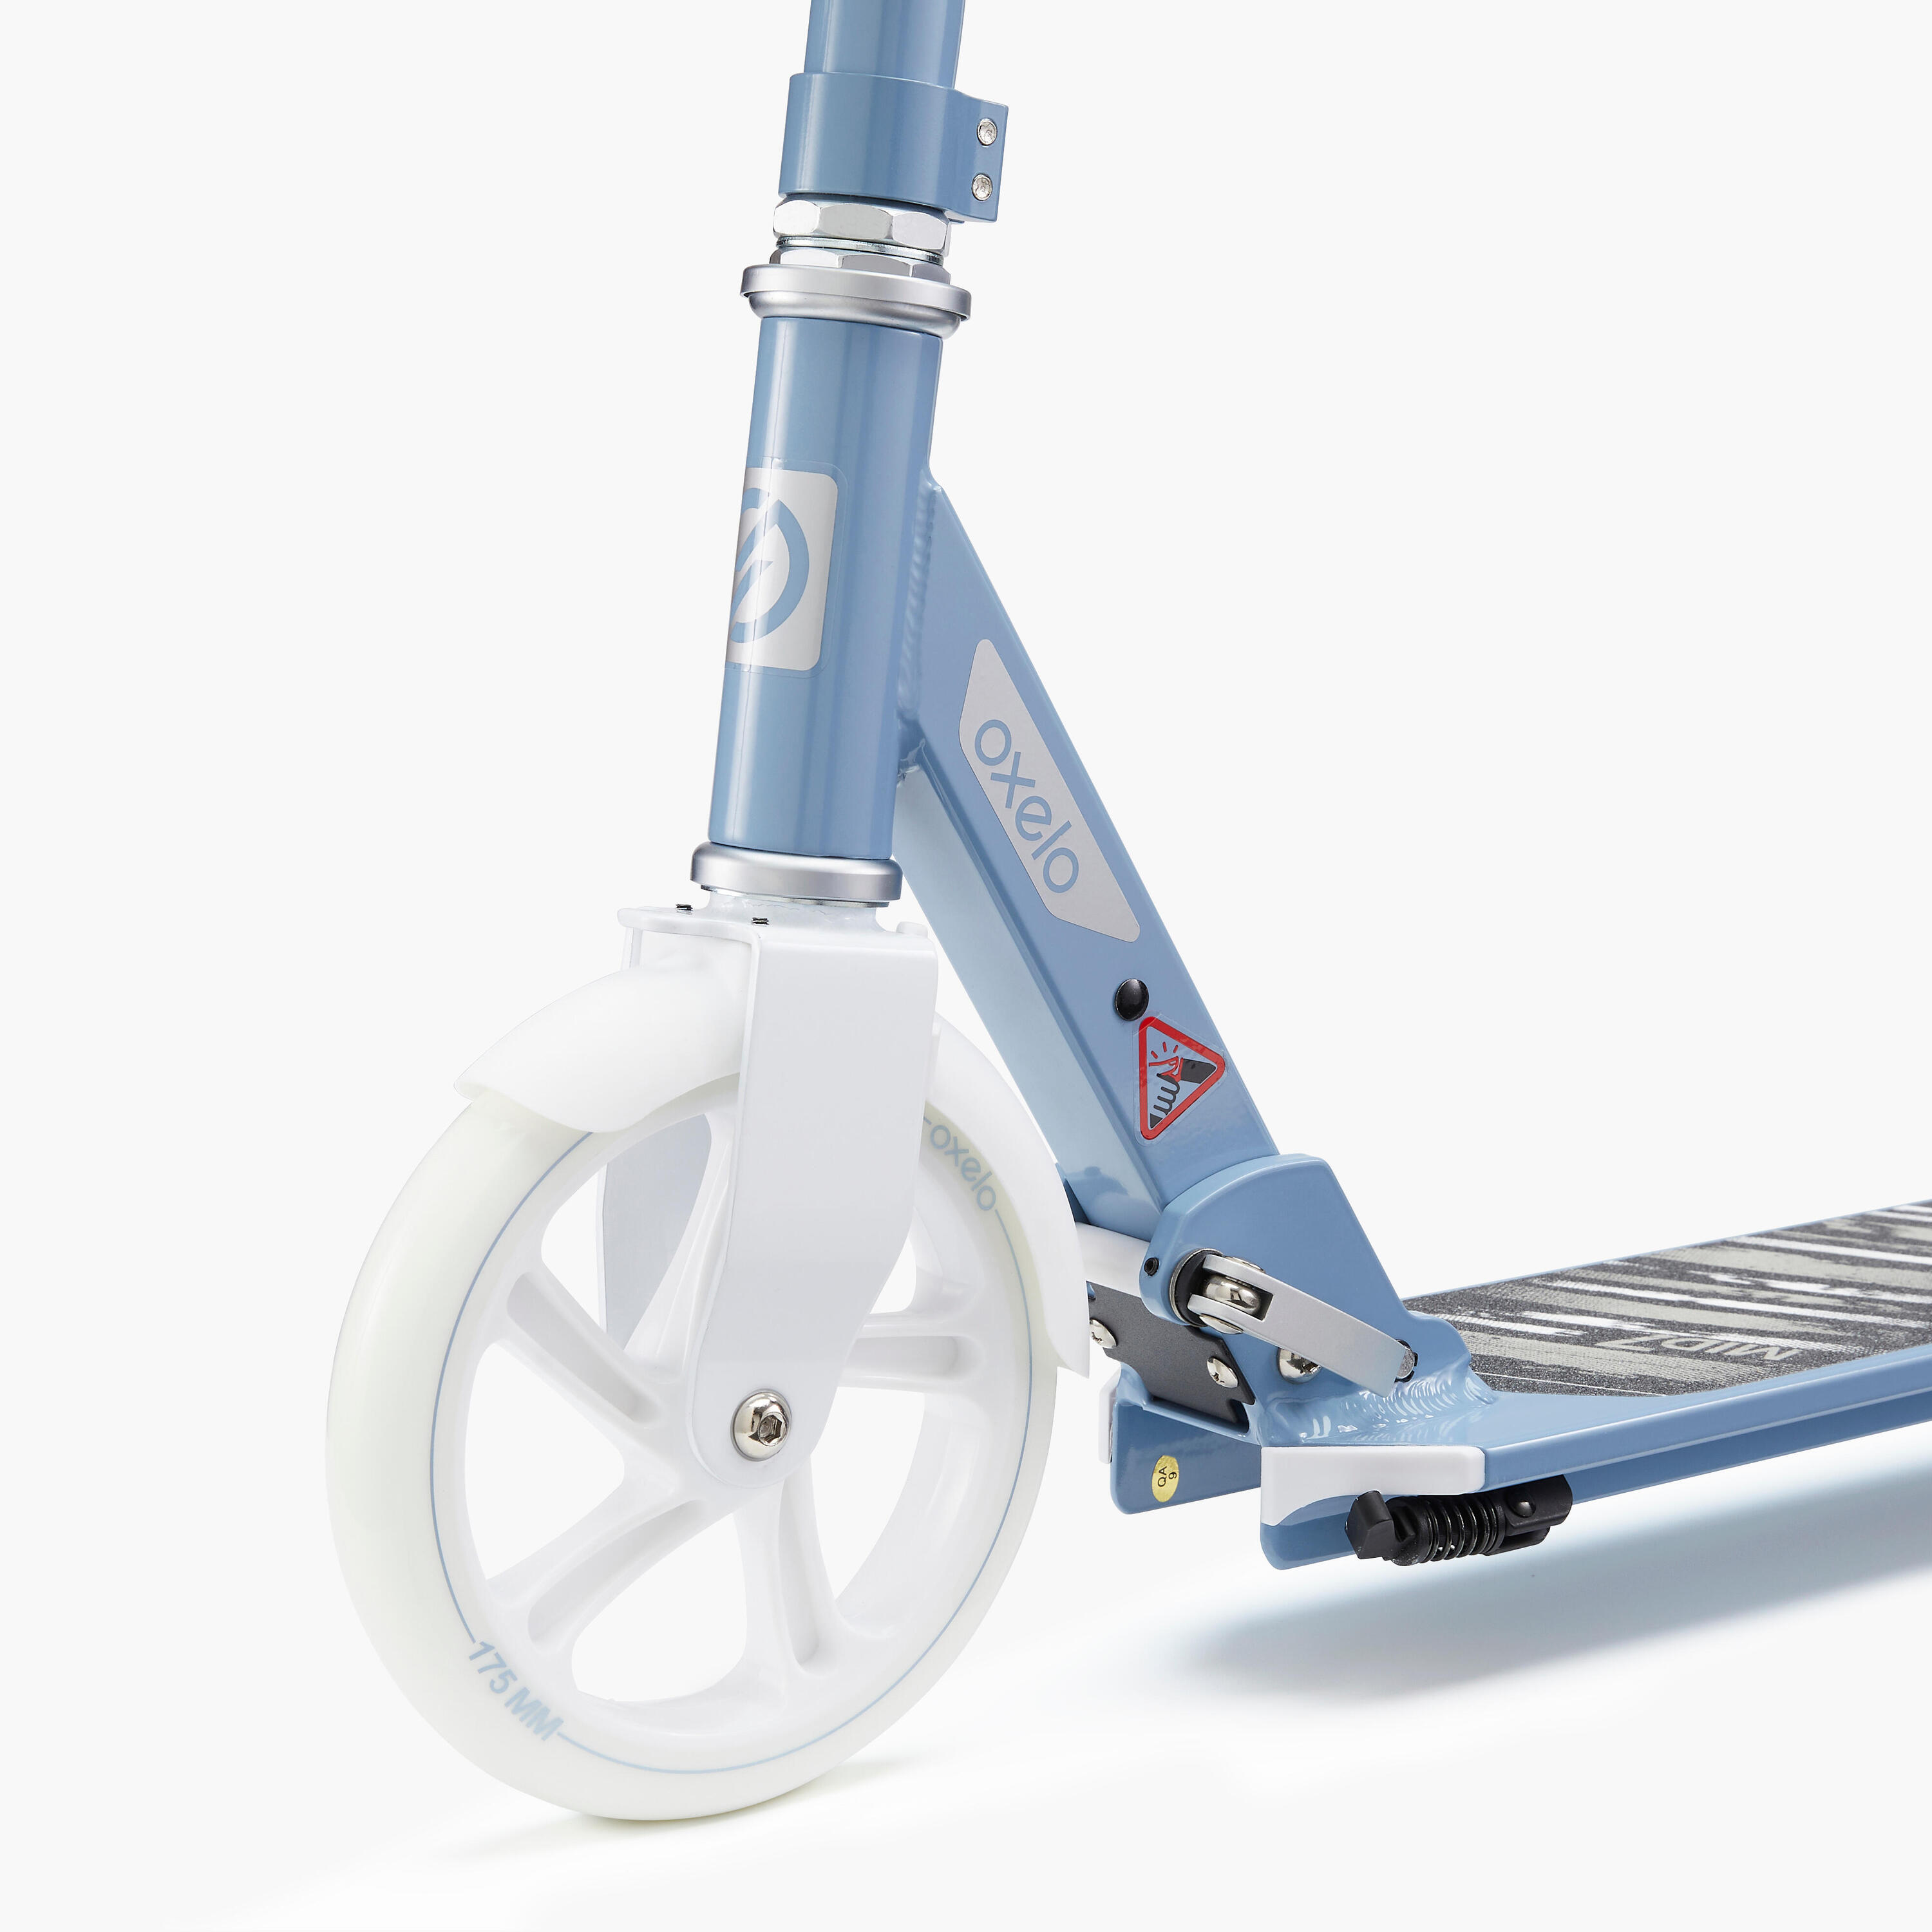 Scooter Mid 7 With Stand - Grey/Blue/White 3/8